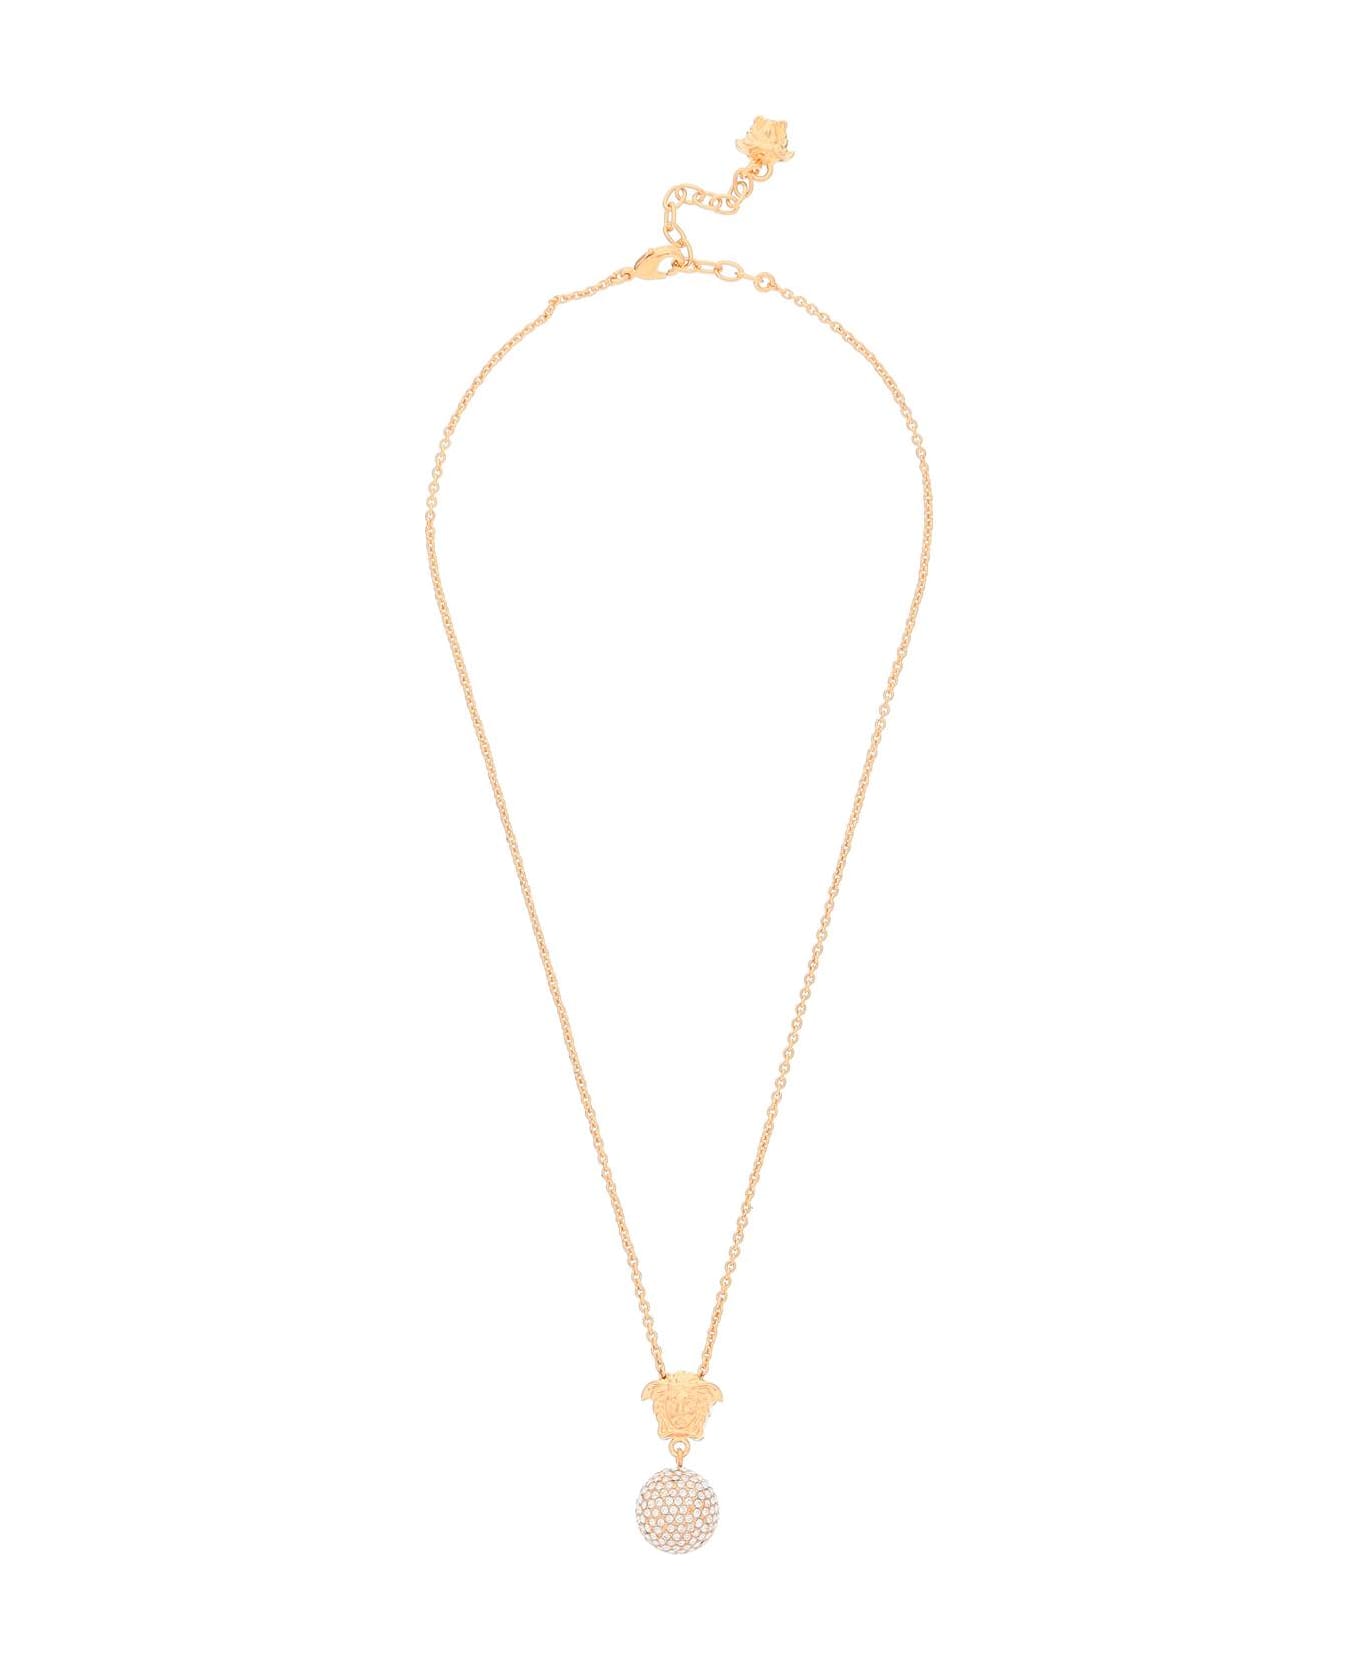 Versace Medusa Crystals Sphere Necklace - Gold Crystall ネックレス